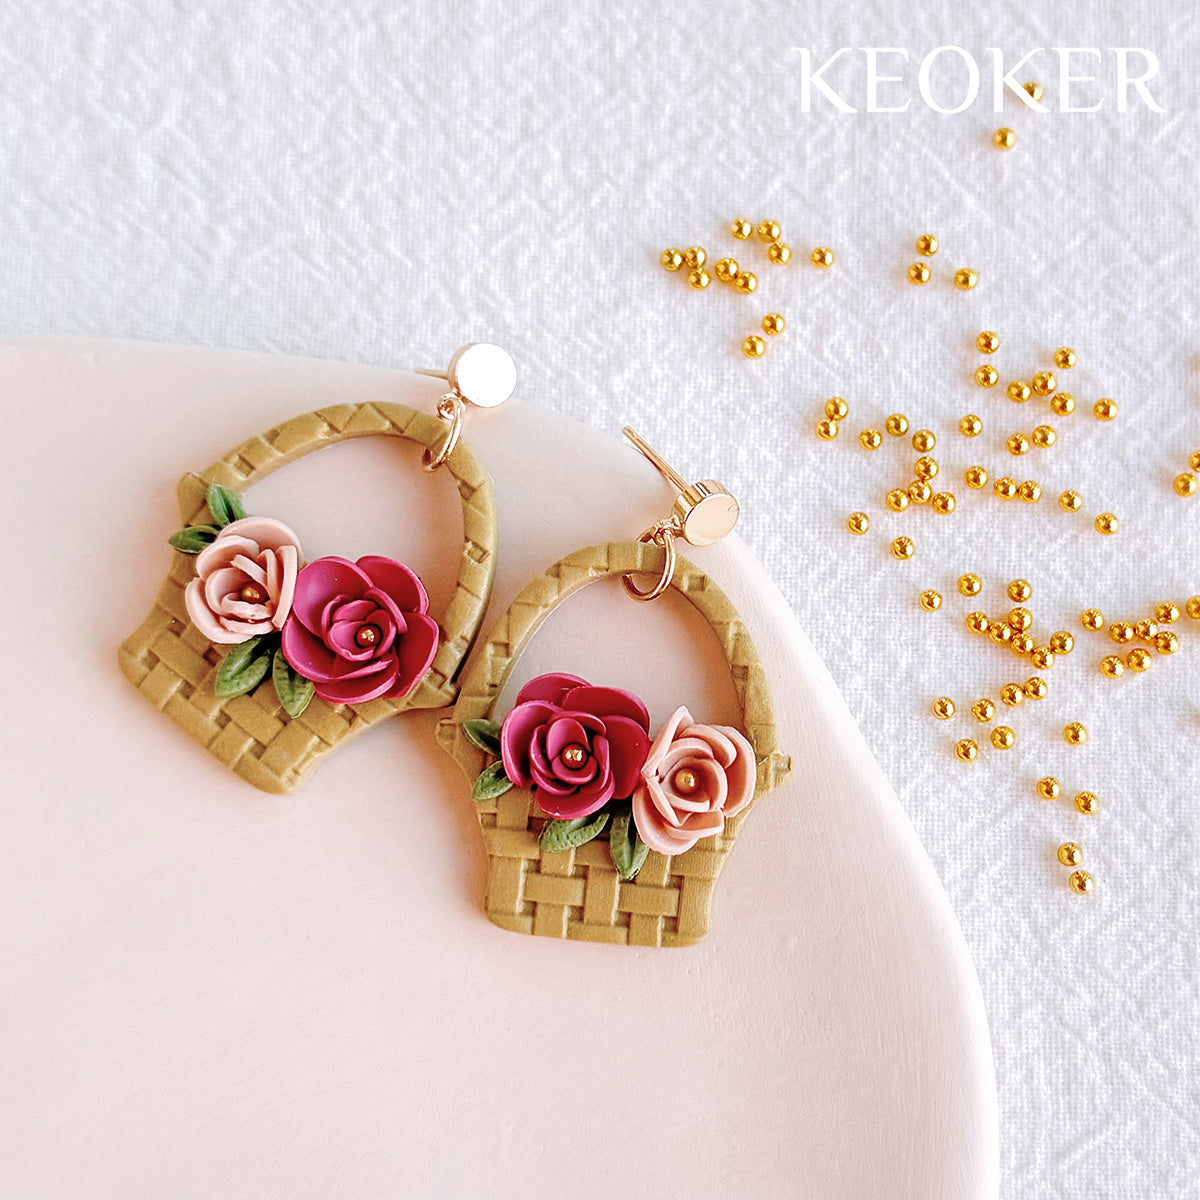 KEOKER Afternoon Tea Polymer Clay Cutters(19 Shapes)